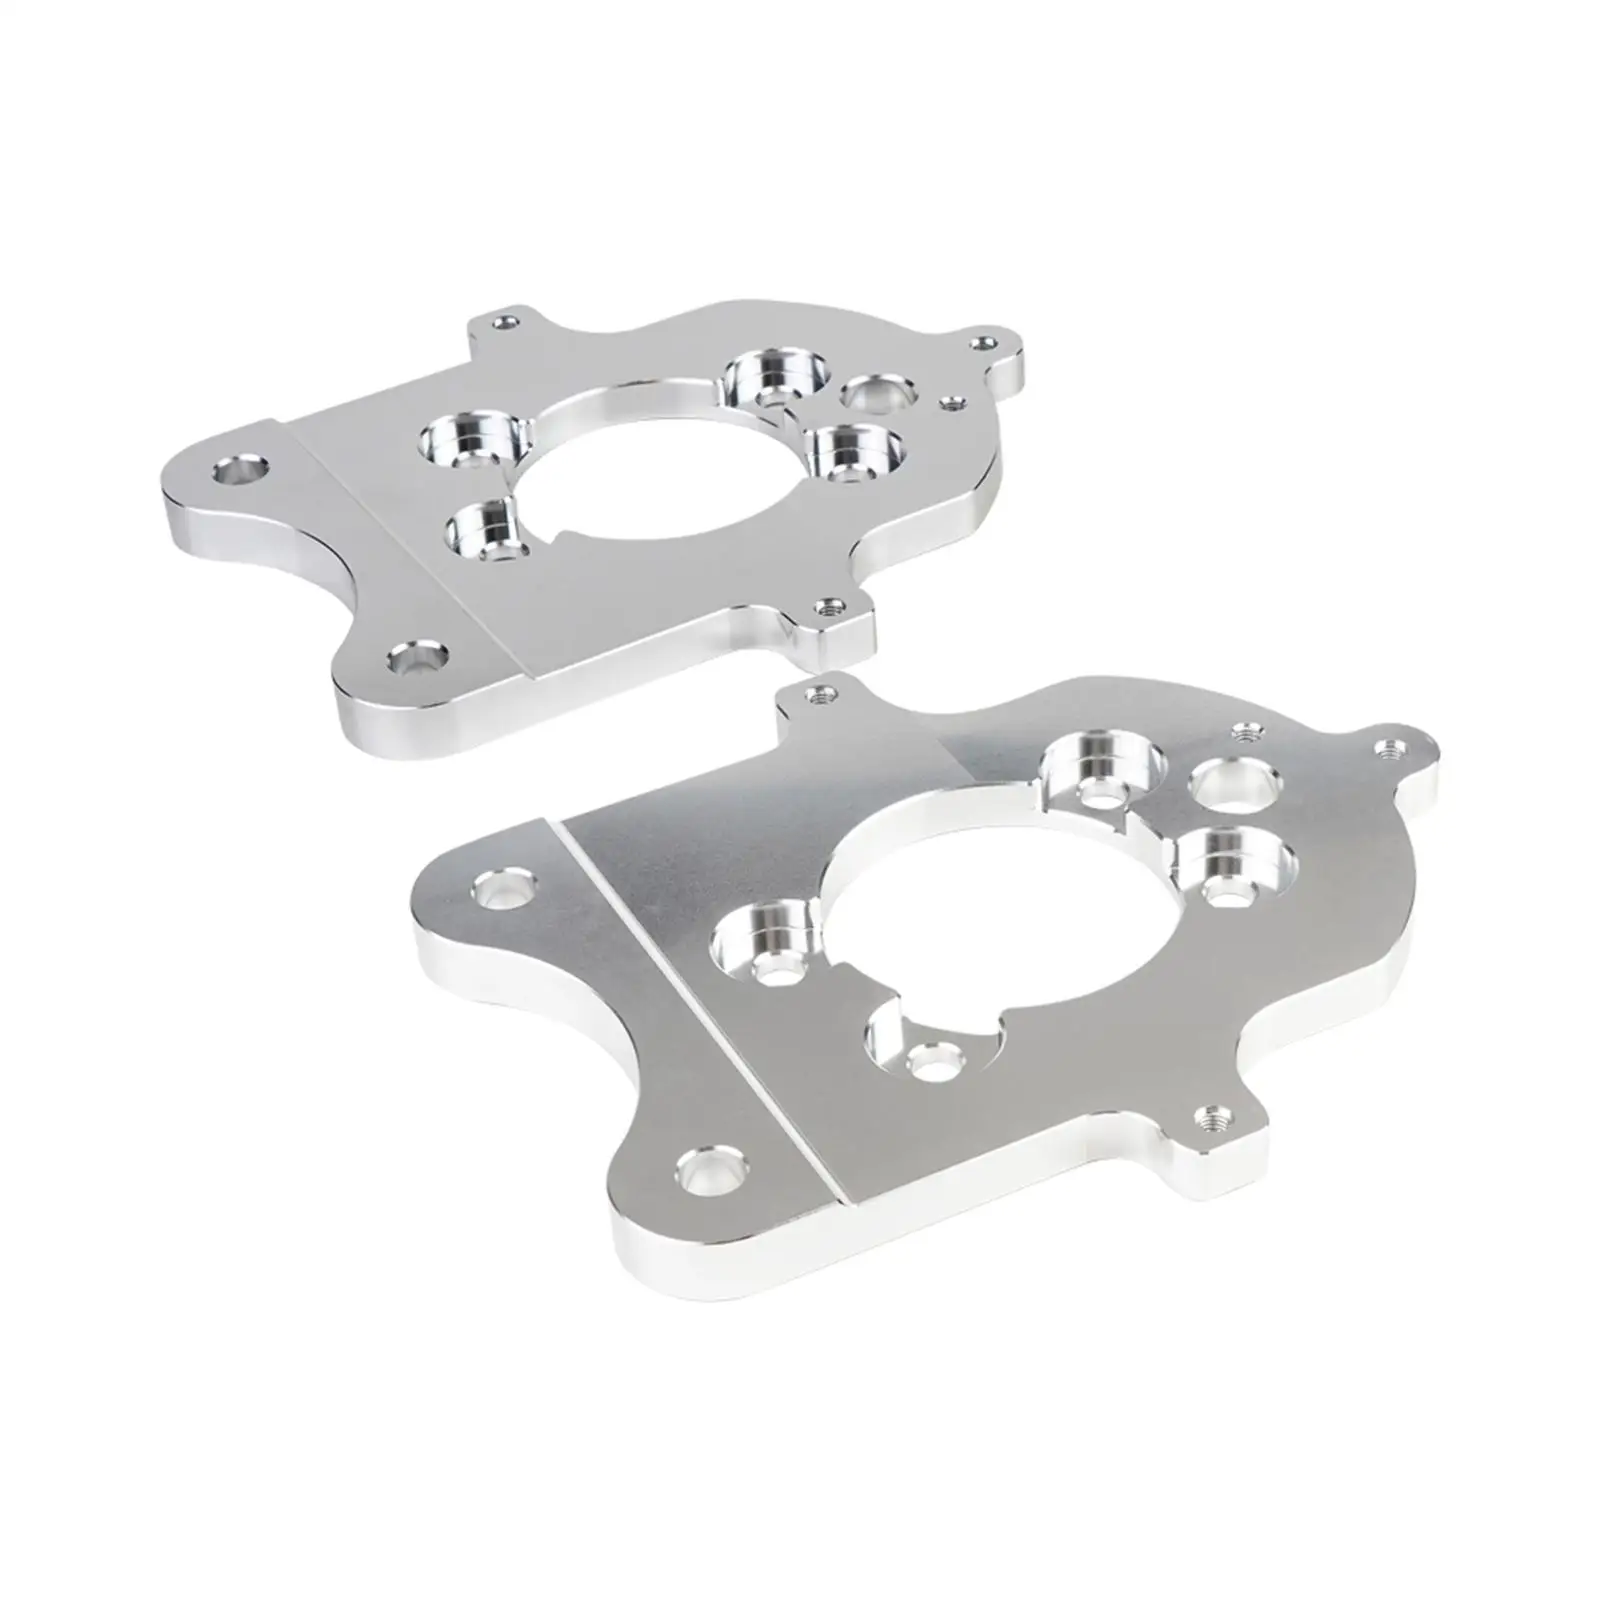 2 Pieces Rear Brake Caliper Mounting Bracket Accessories for SN95 Practical